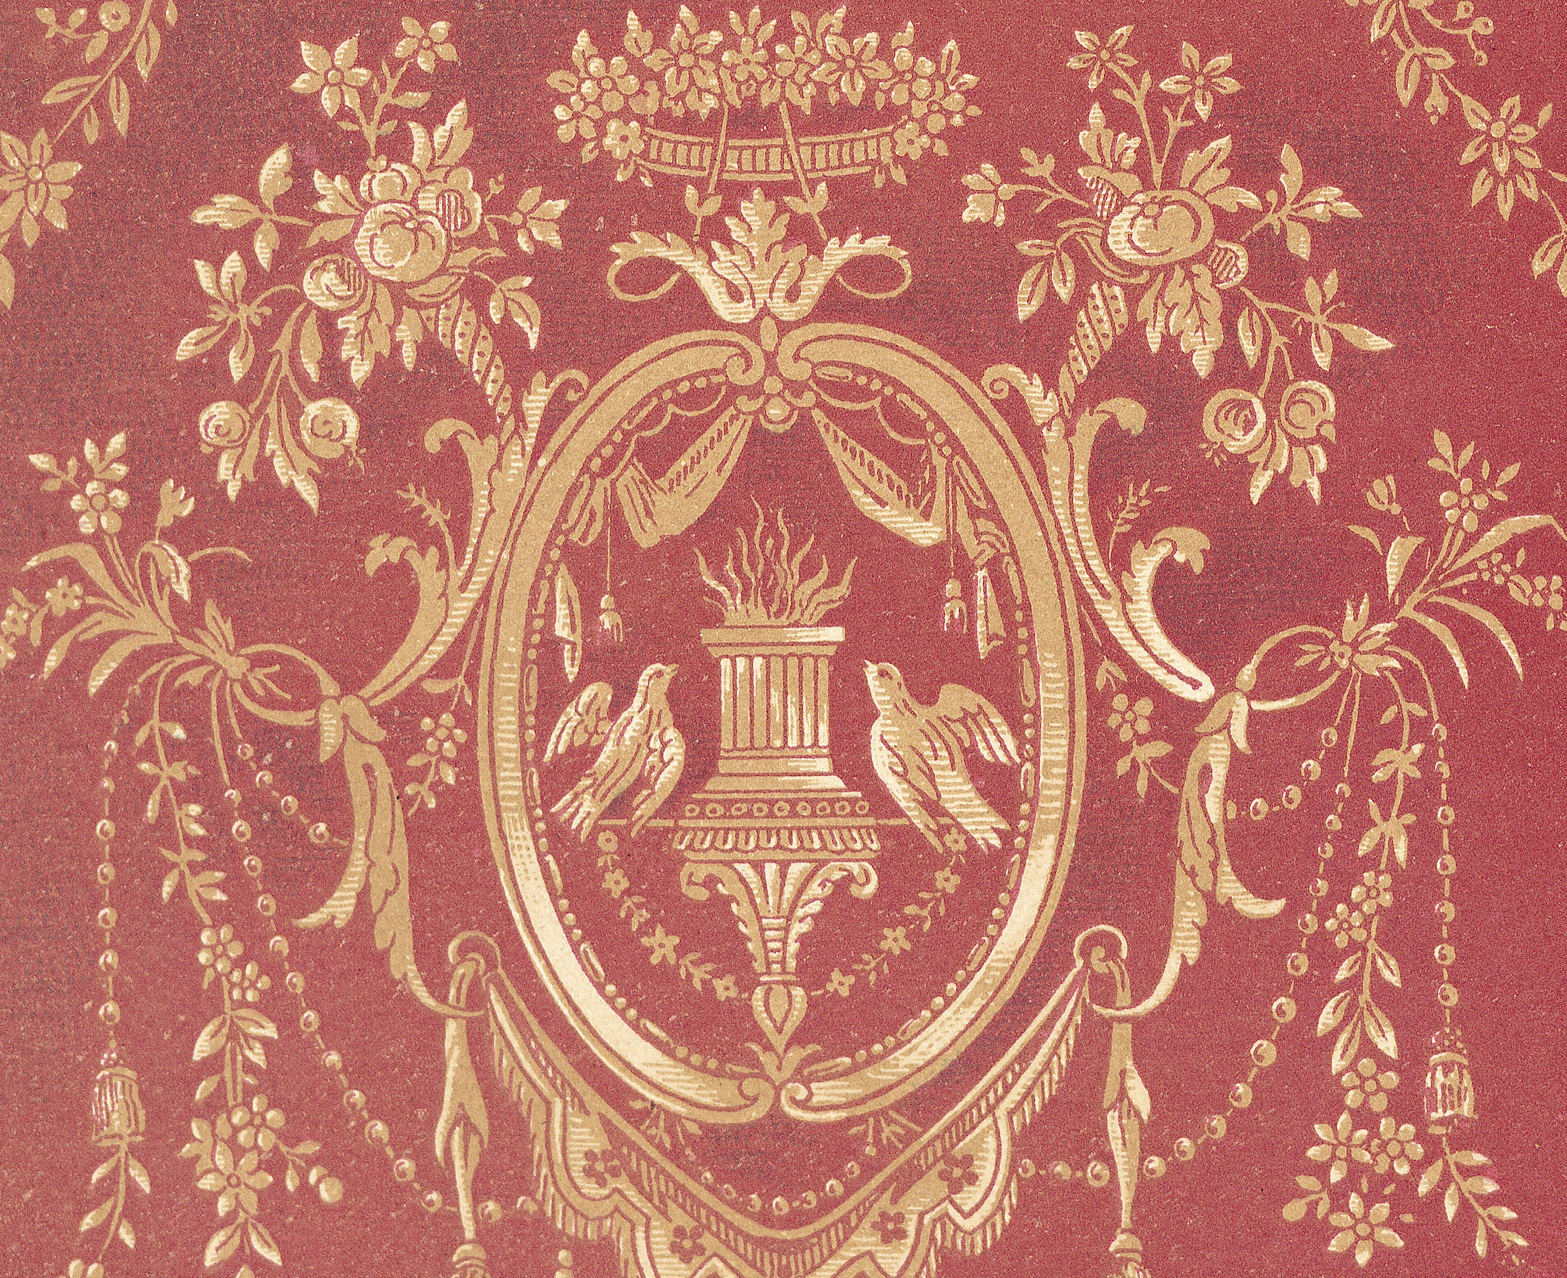 Decor Wallpaper In The S Days Of Century Homes